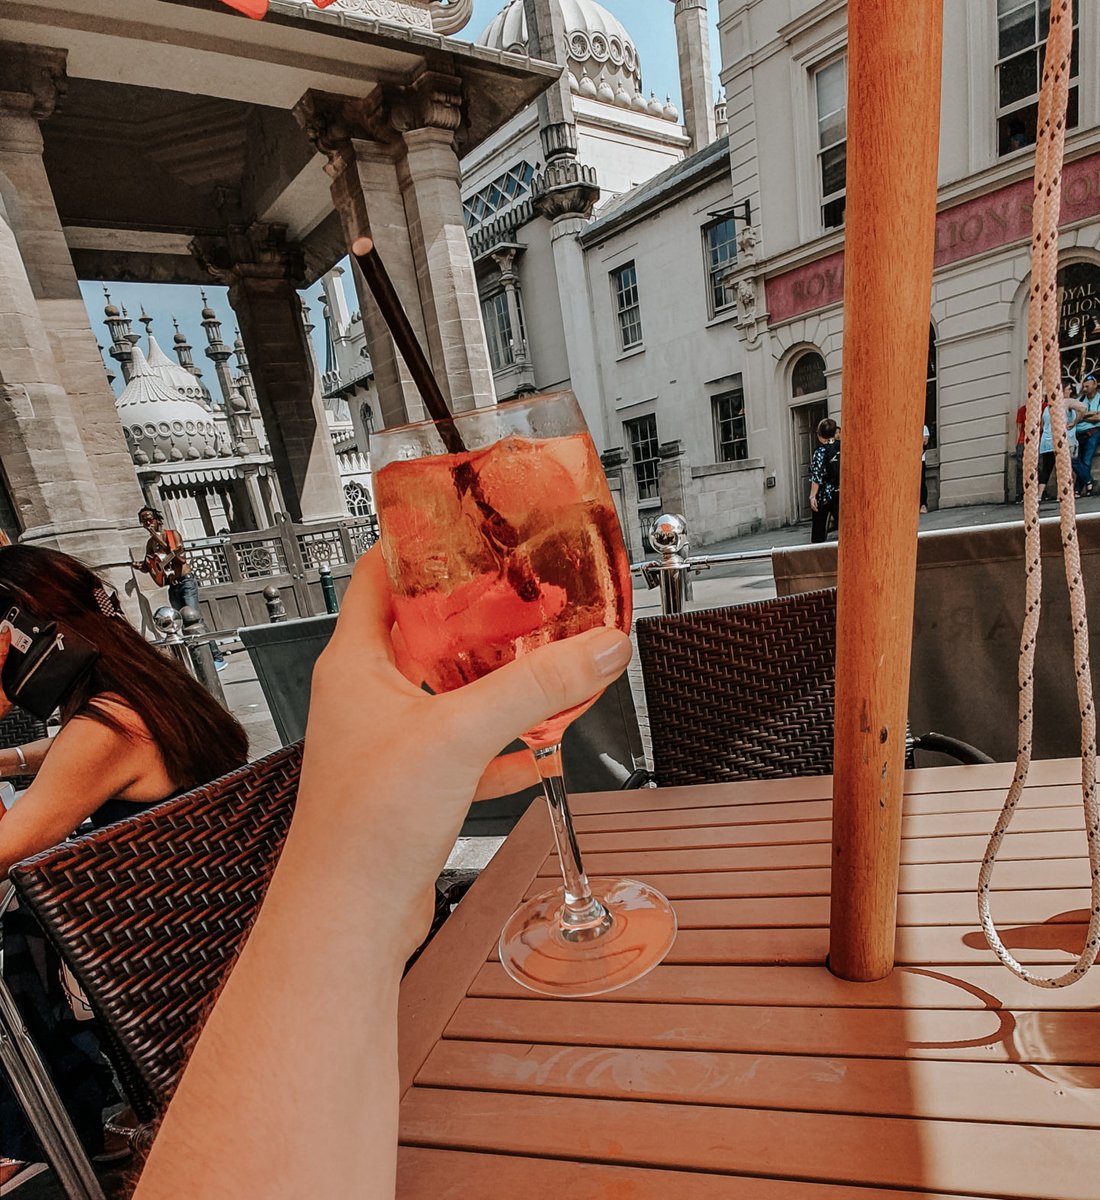 Let's have a catch up over a cocktail and a few bits of advice I'm glad I've taken recently thecurvaceousvegan.com/2019/09/22/a-l… #thegirlgang #lbloggers #blogginggals @sotonbloggers #fblchat #GRLPOWR #bloggerstribe #influencerrt #theclqrt #teacupclub #bloggershutrt